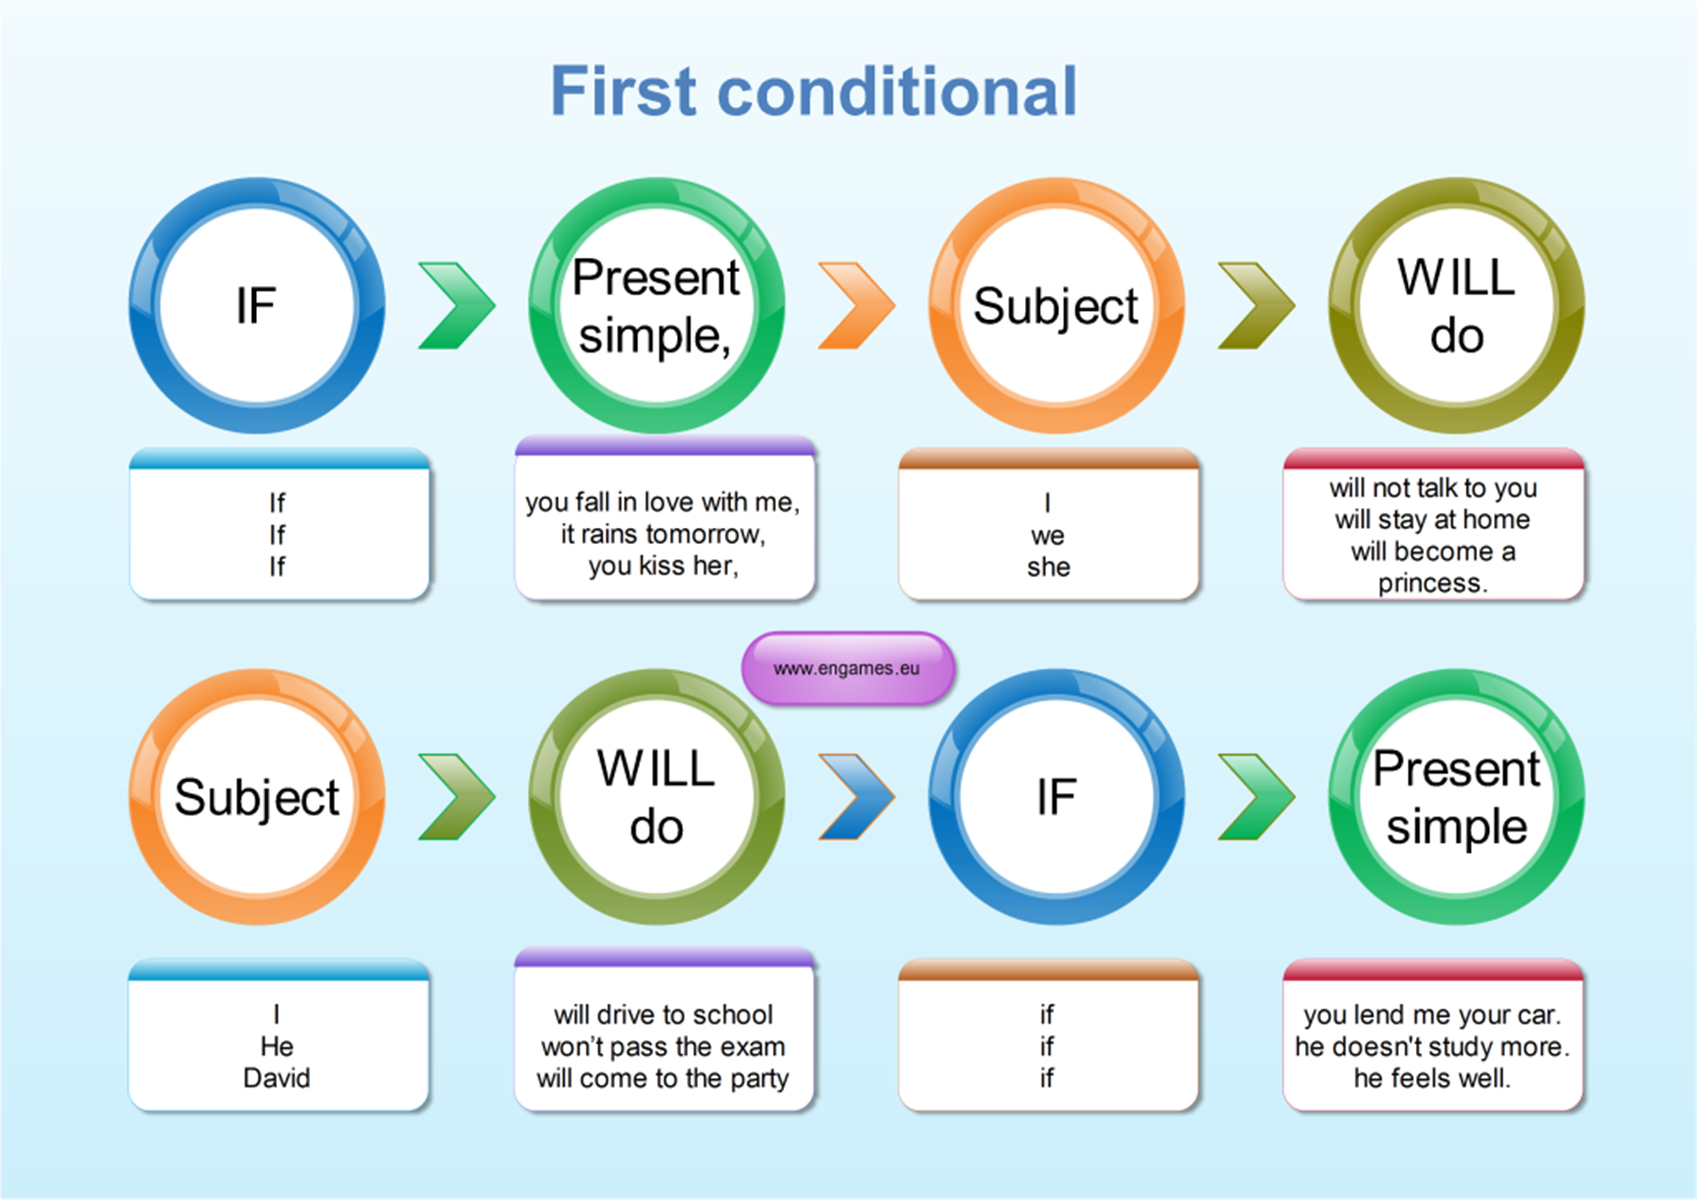 1st conditional формула. First condition английском языке. First conditional. First conditional правило. You can use any 1